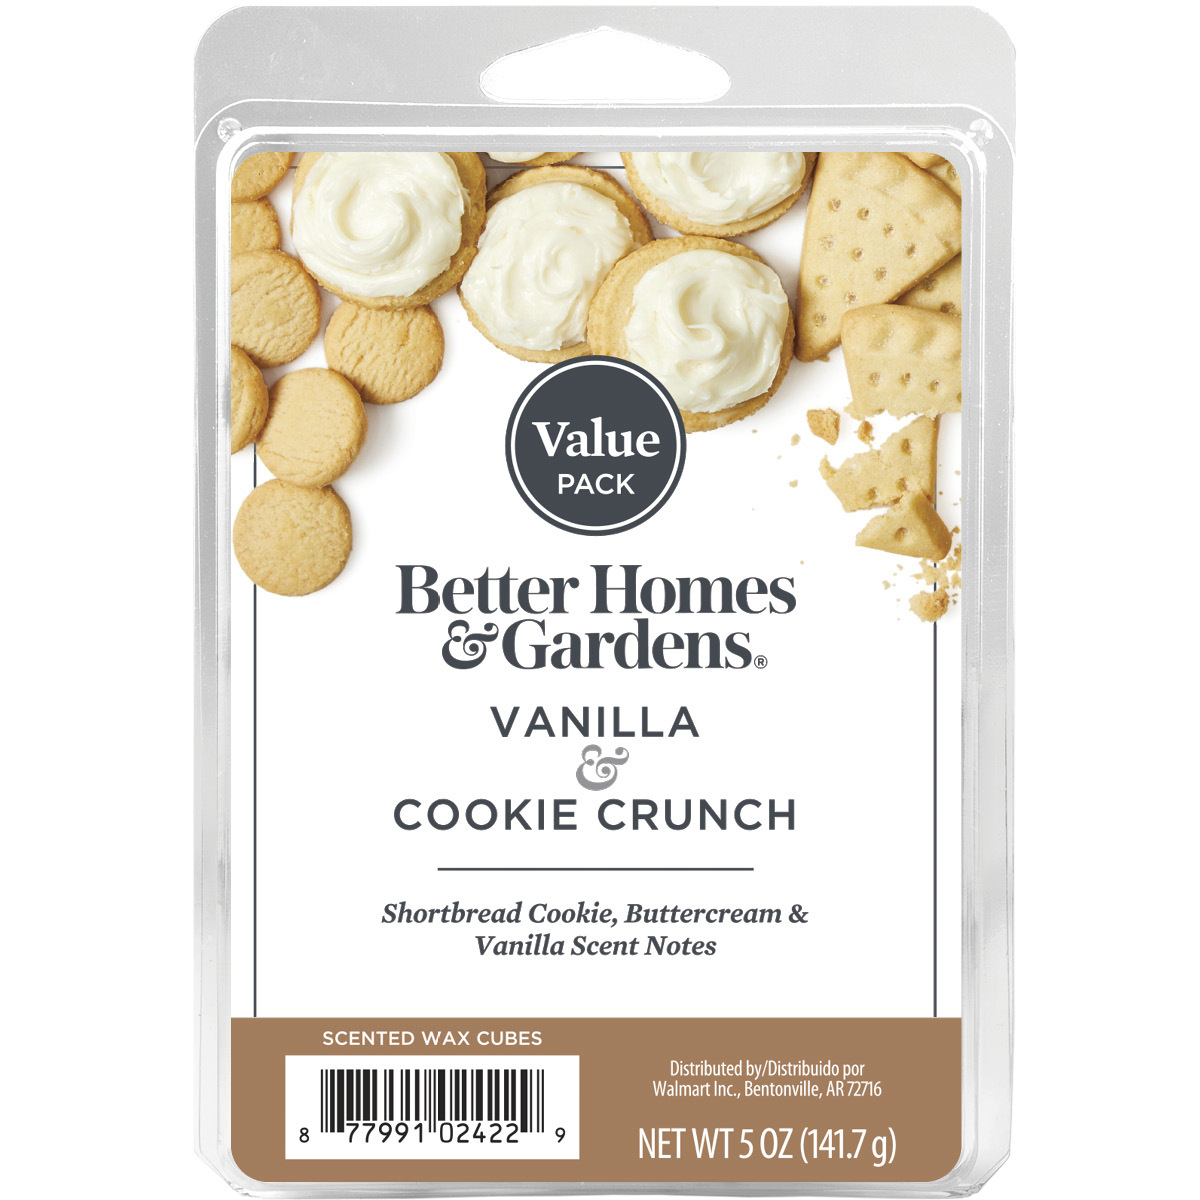 Vanilla Cookie Crunch Scented Wax Melts, Better Homes & Gardens, 5 oz (Value Size) - image 1 of 9